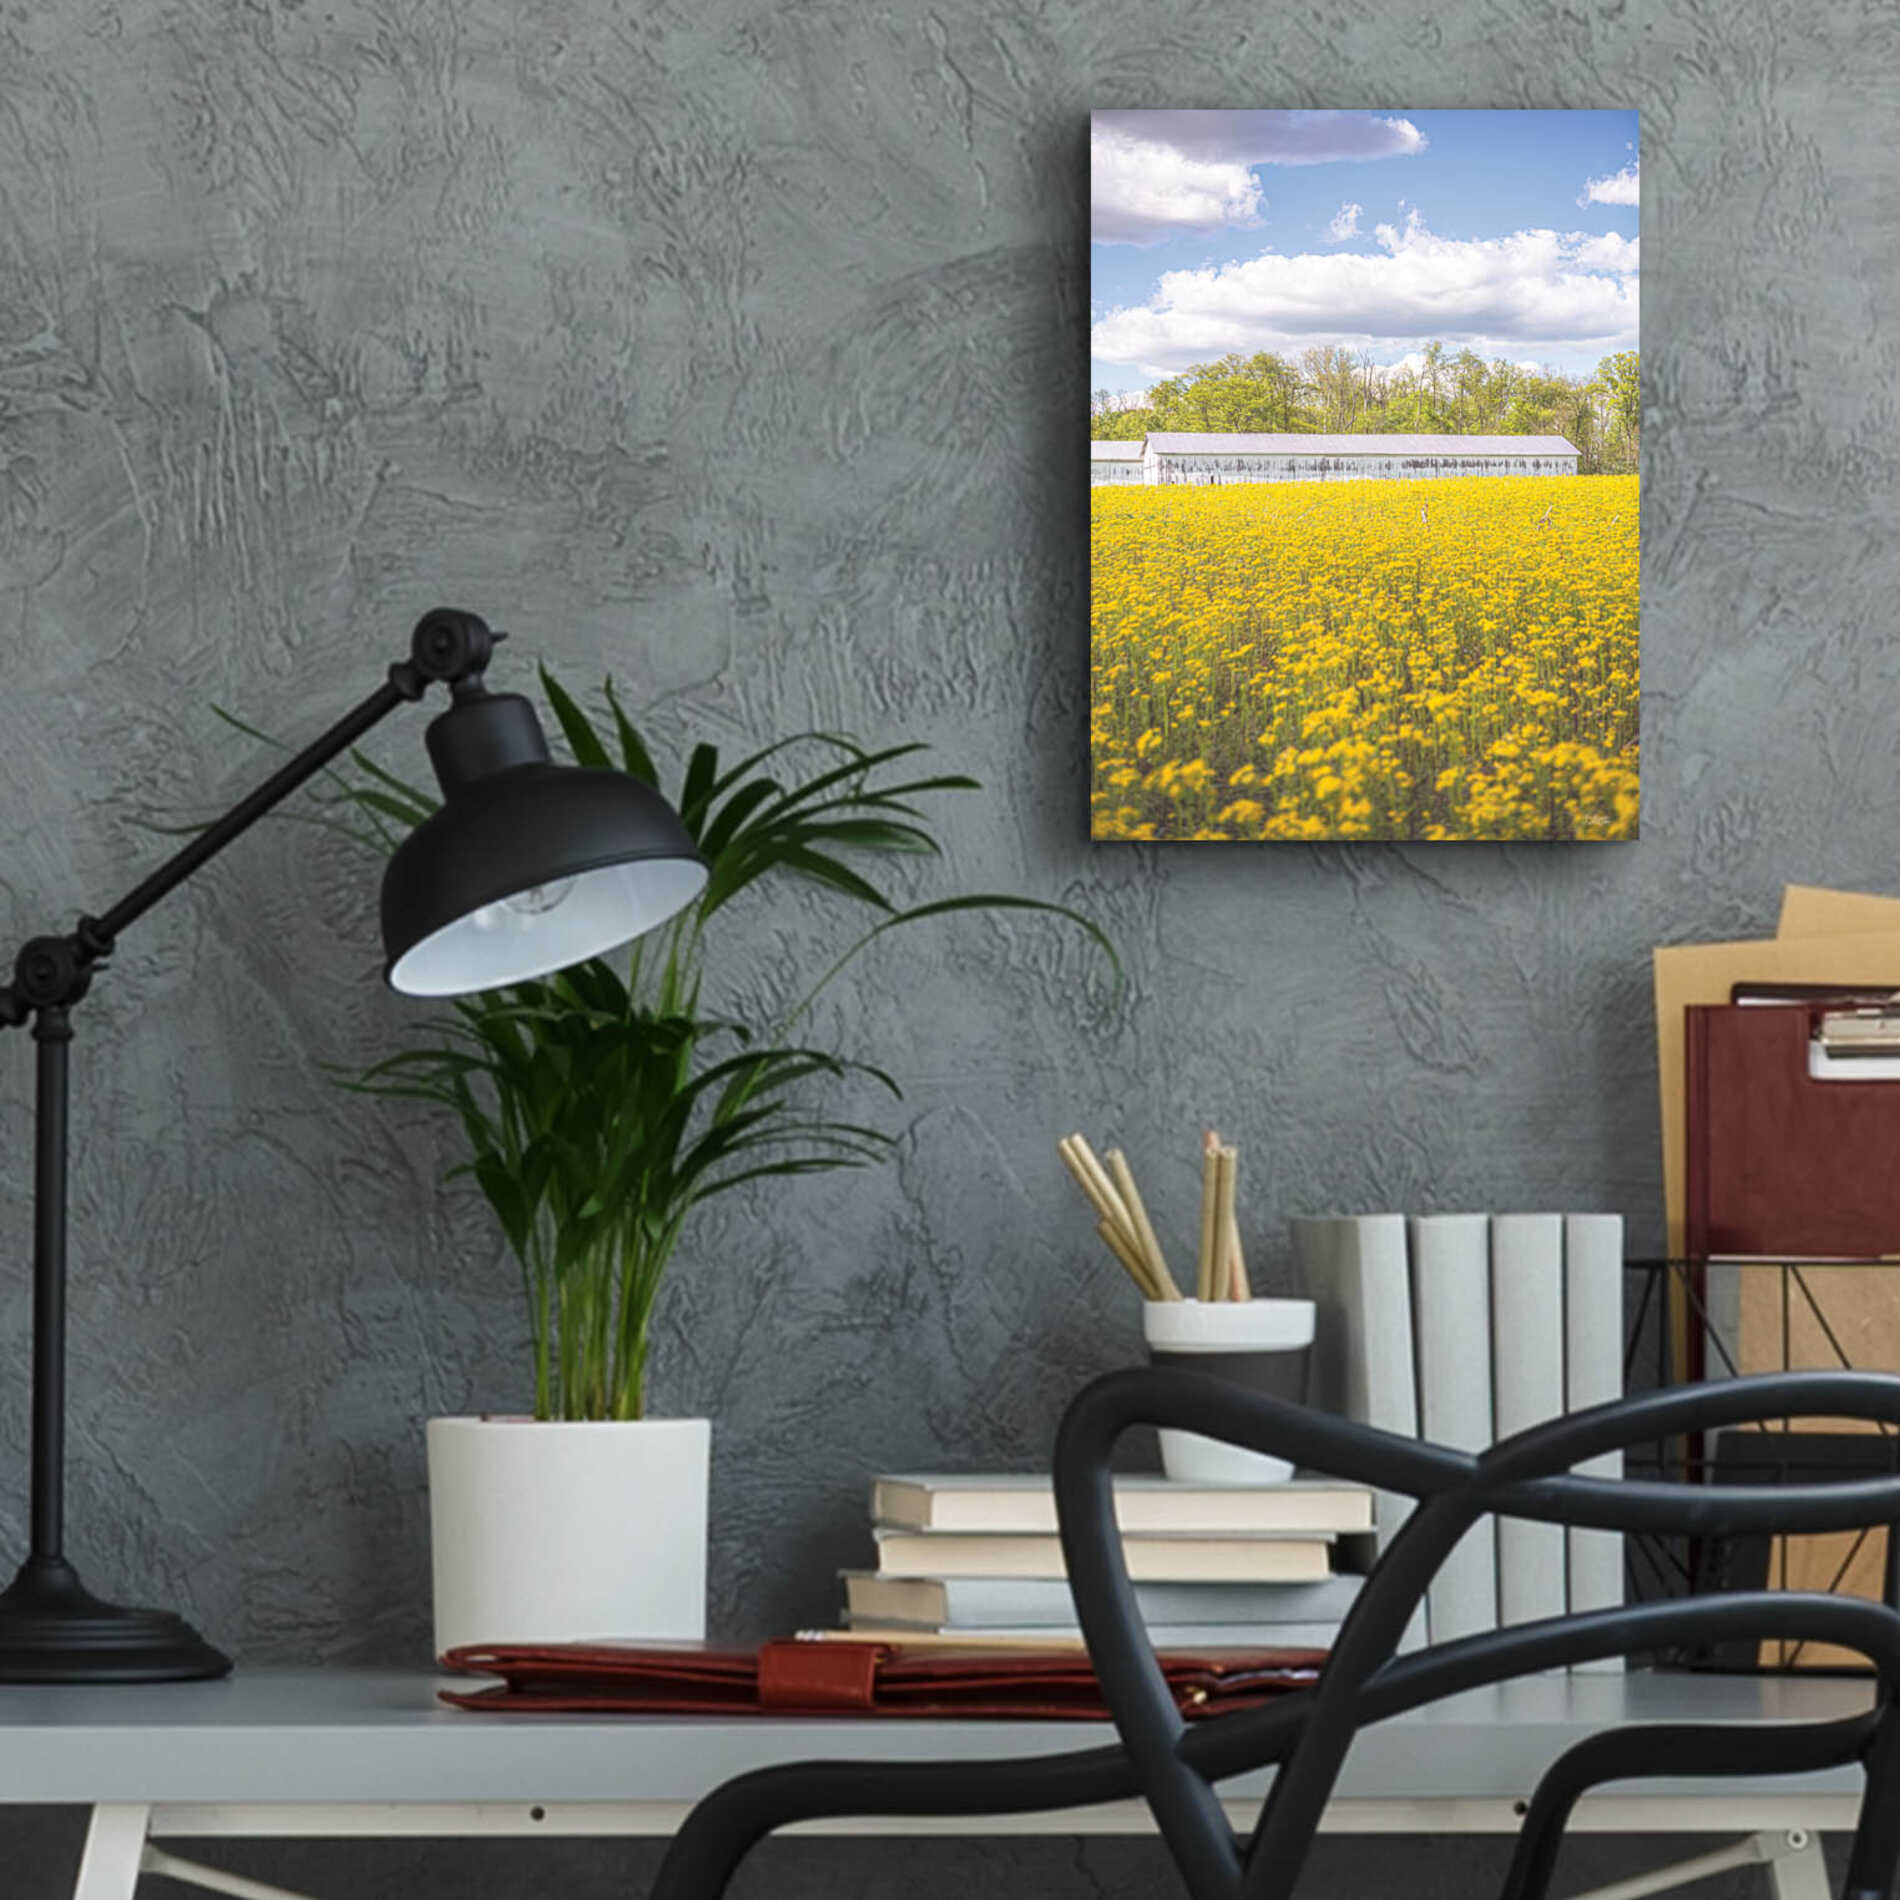 Epic Art 'Field Of Yellow I' by Donnie Quillen, Acrylic Glass Wall Art,12x16